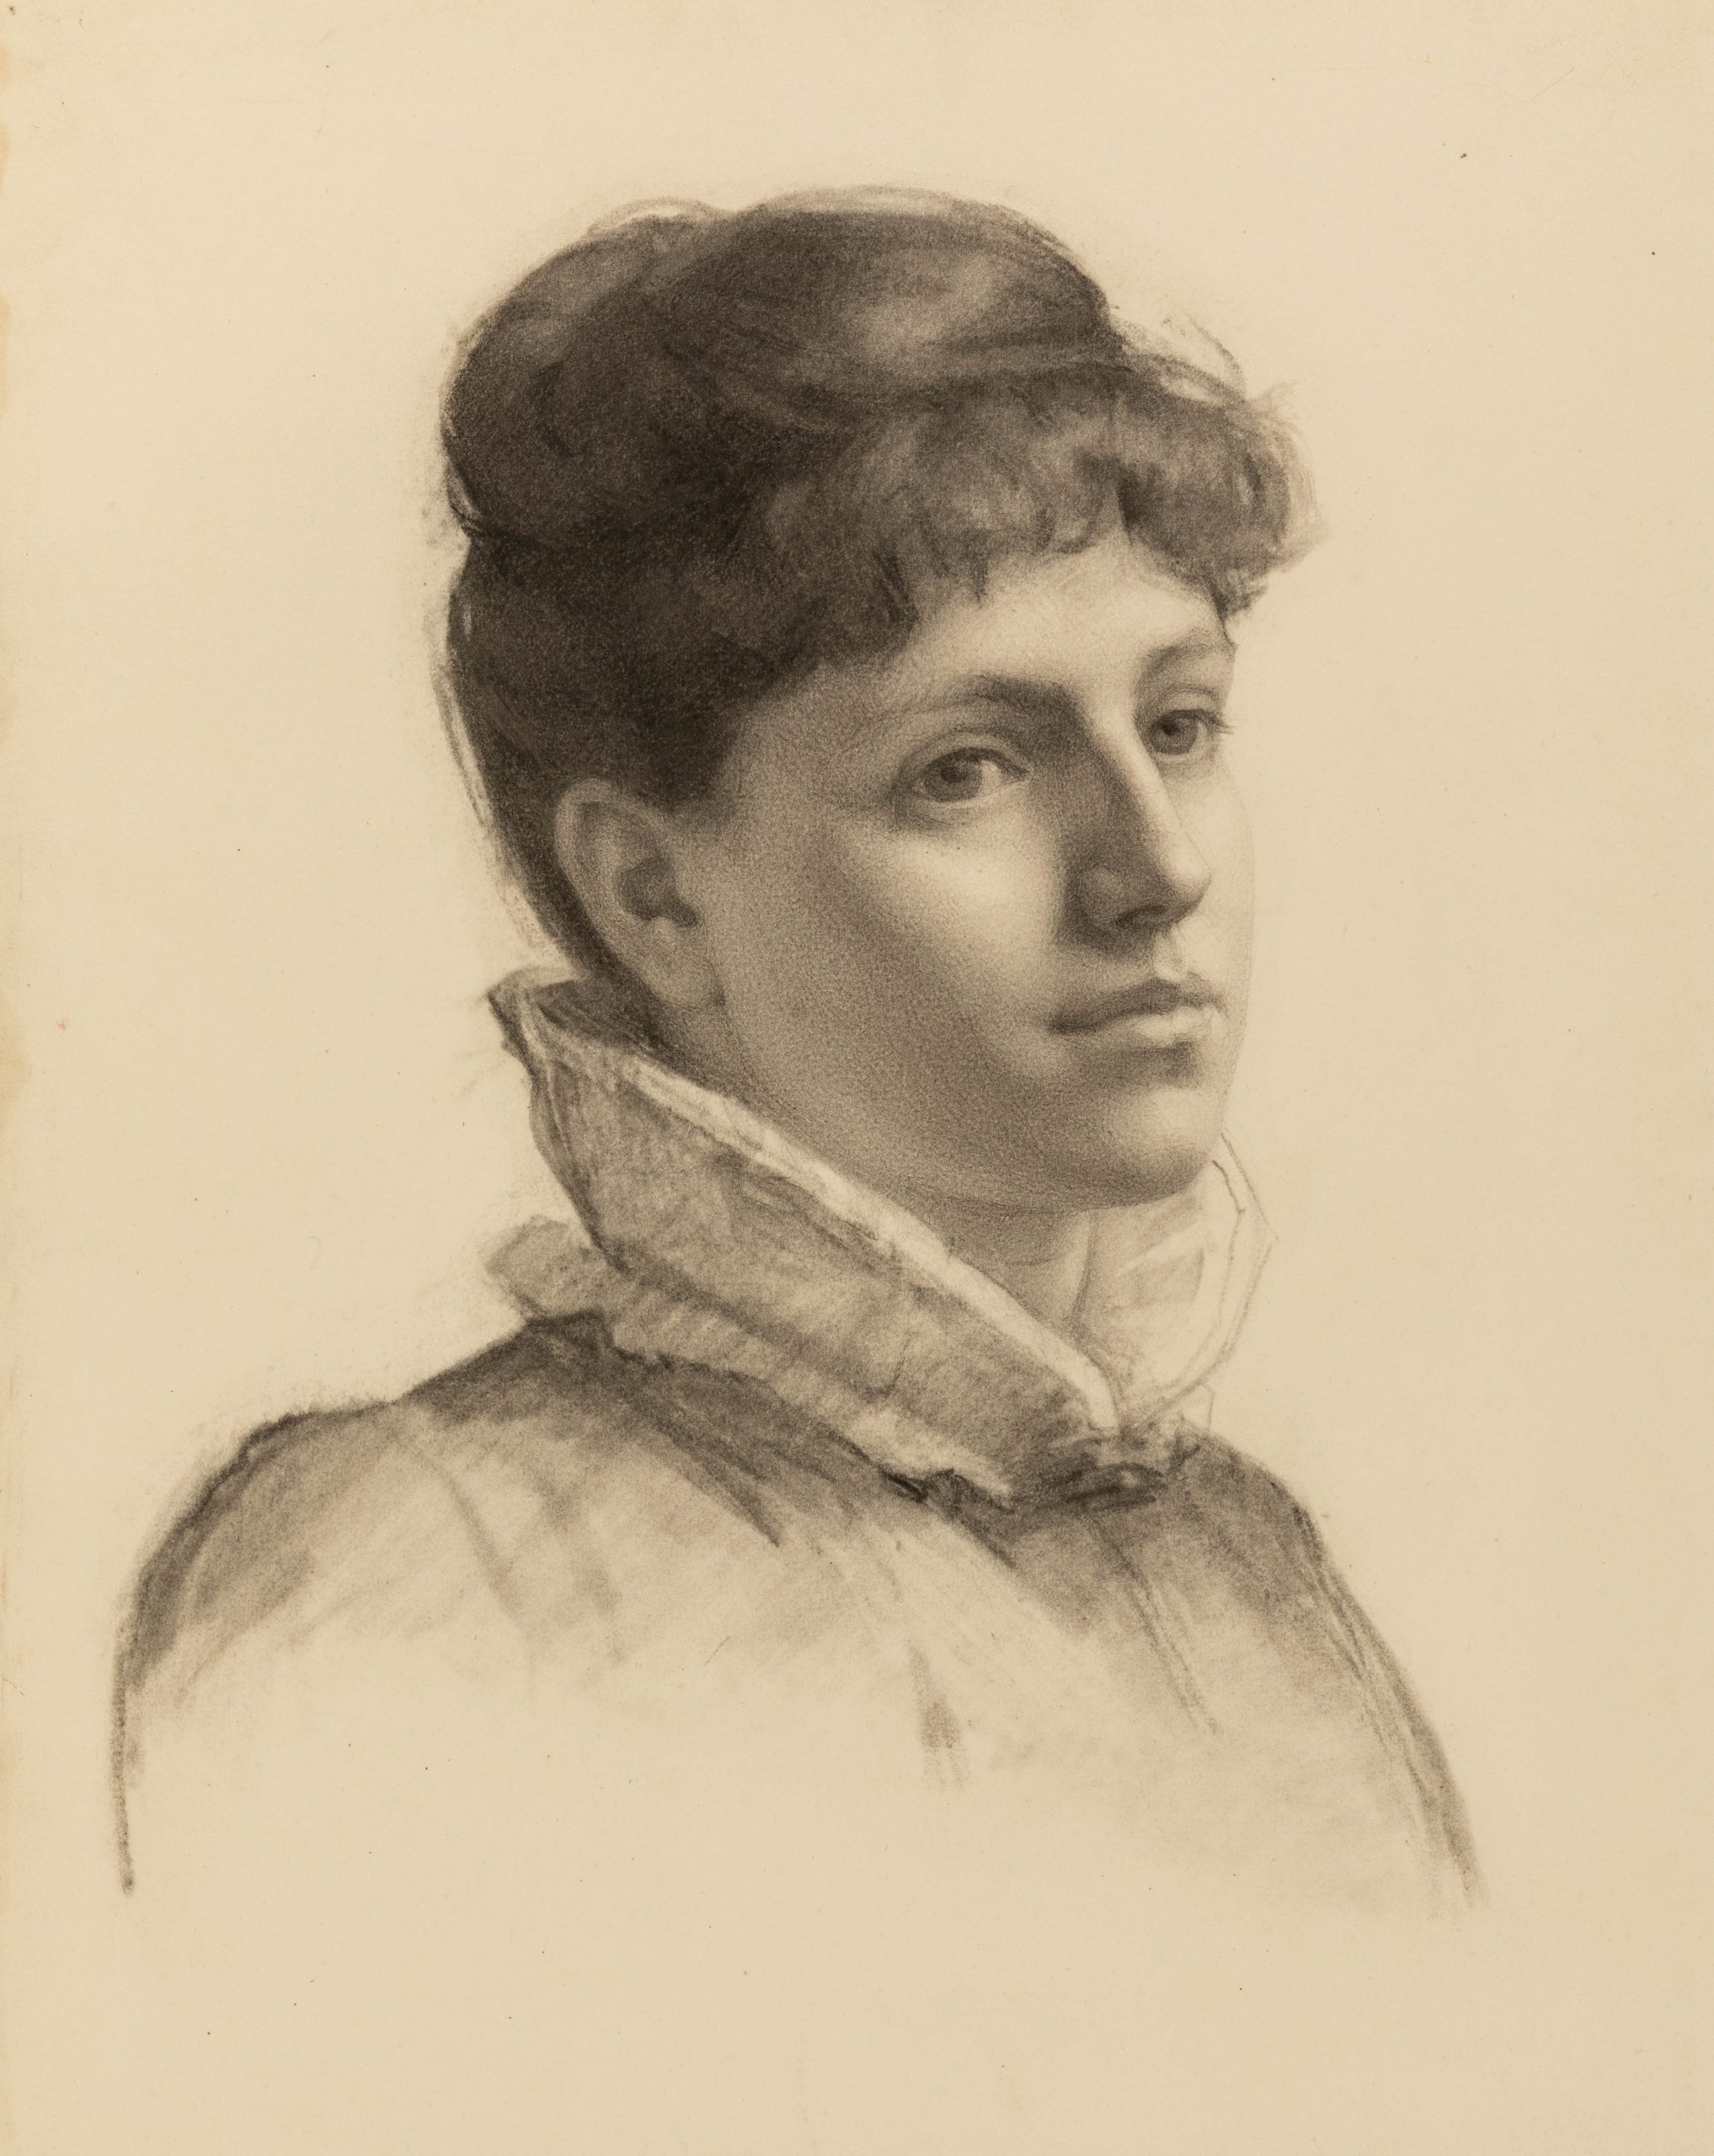 Bust-length portrait of a young woman, head turned to the right